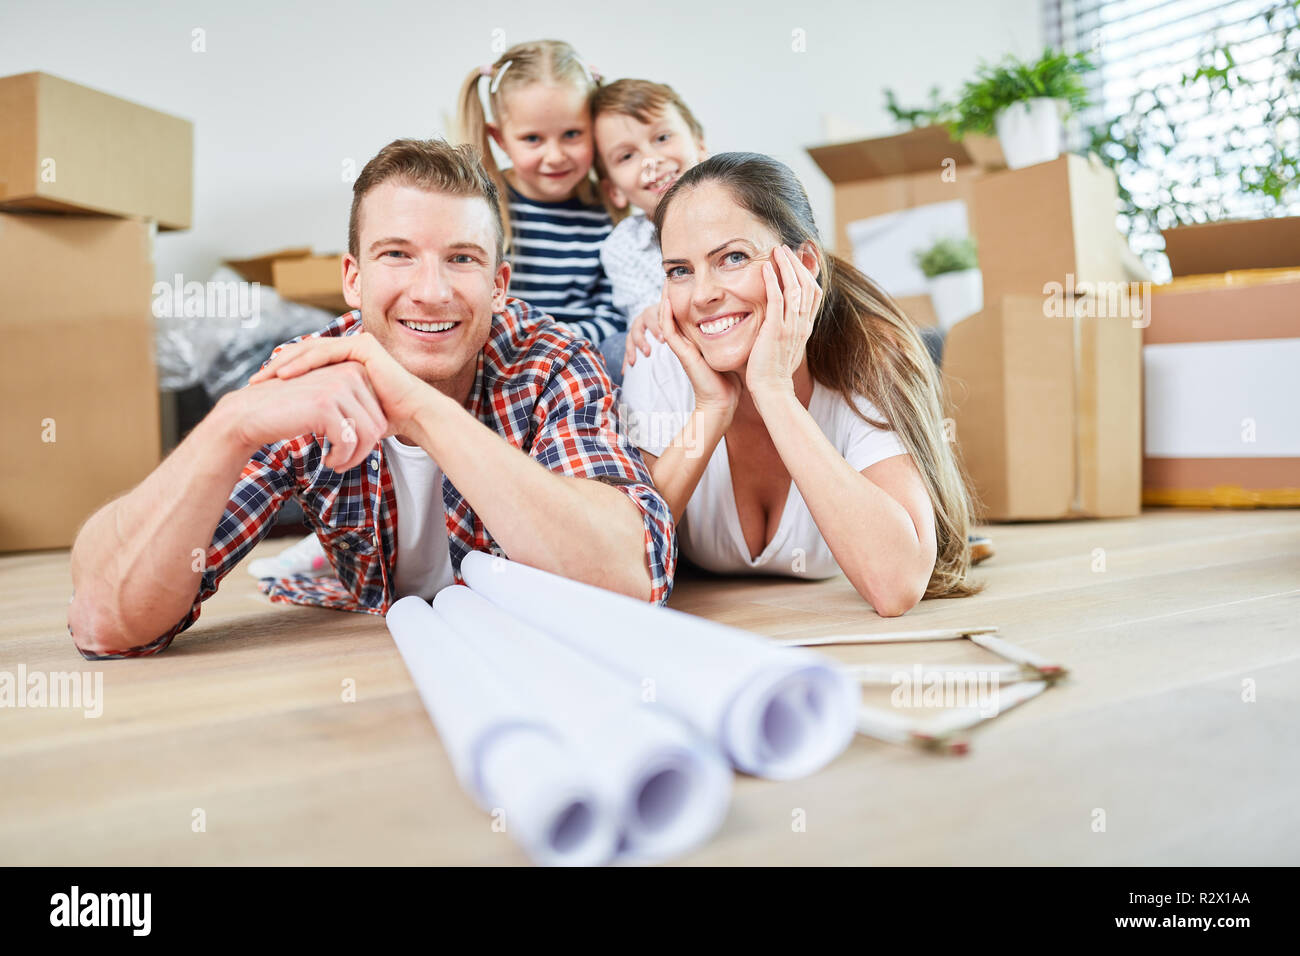 Happy family and children after moving to new apartment or home Stock Photo